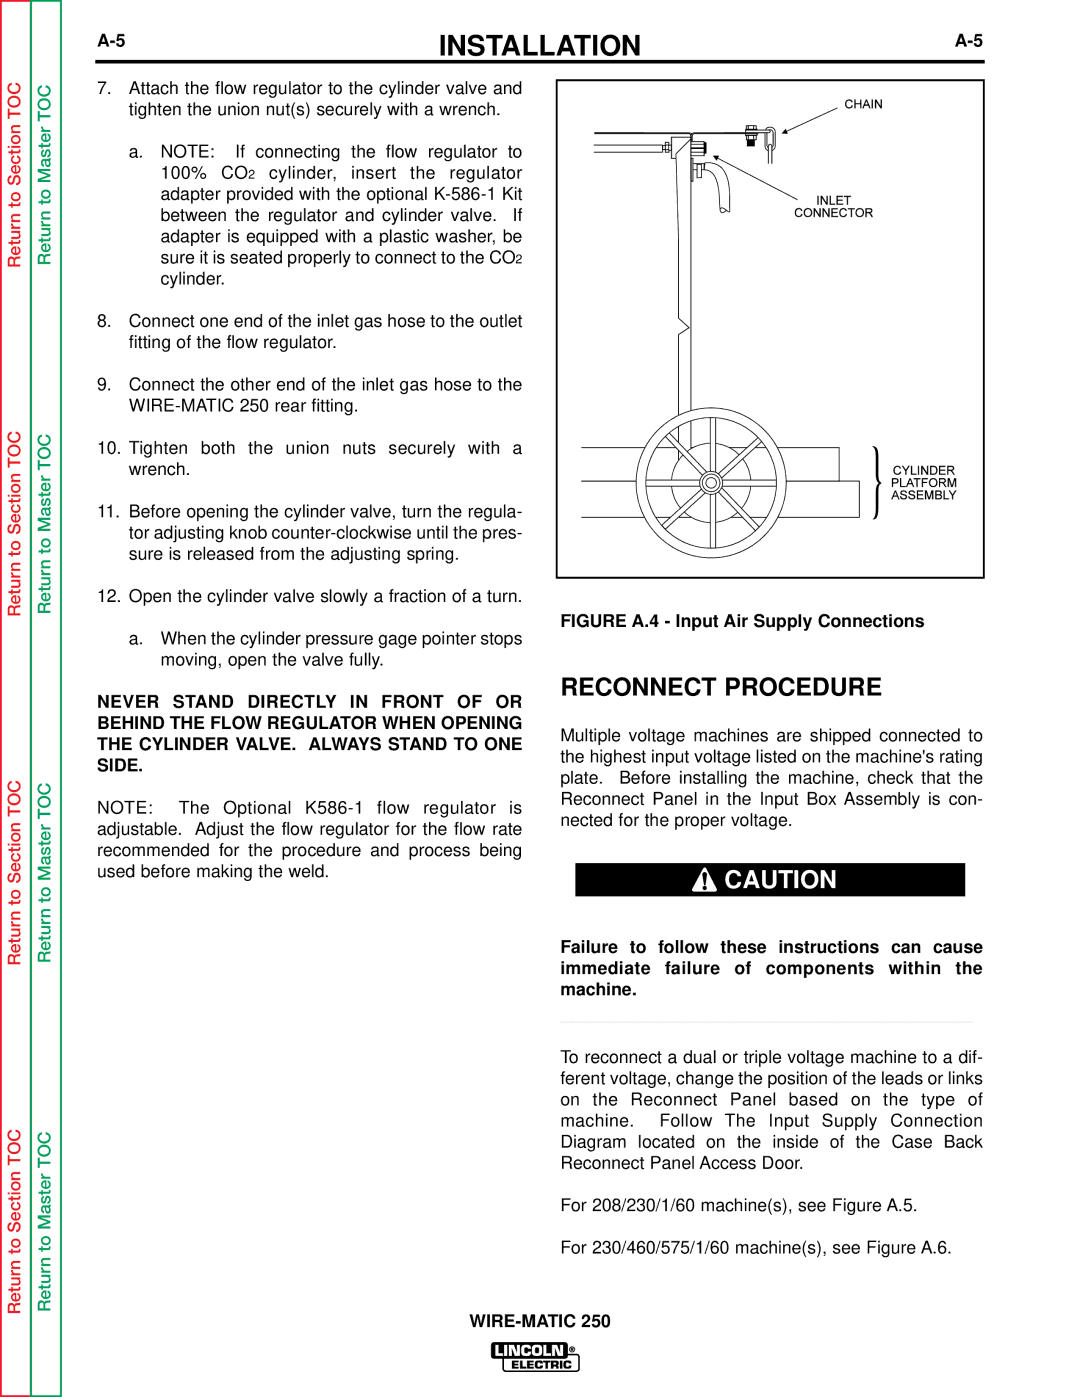 Lincoln Electric SVM 117-A service manual Reconnect Procedure, Figure A.4 Input Air Supply Connections 